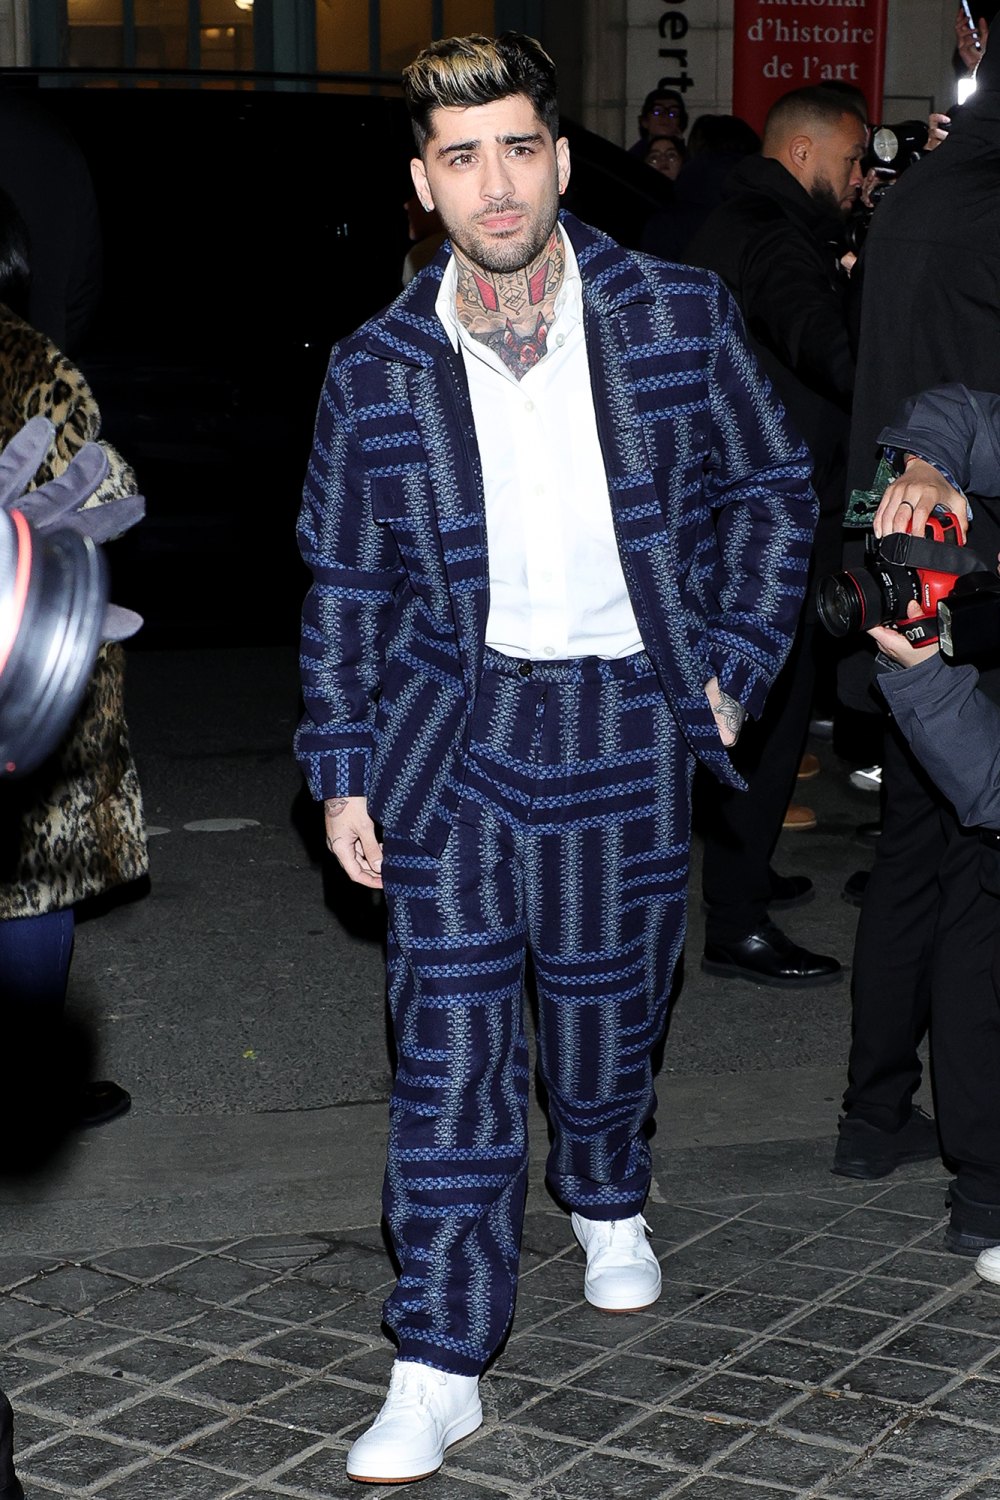 Pajama Fashion: Stars Who Basically Just Wore PJs to Hollywood Events